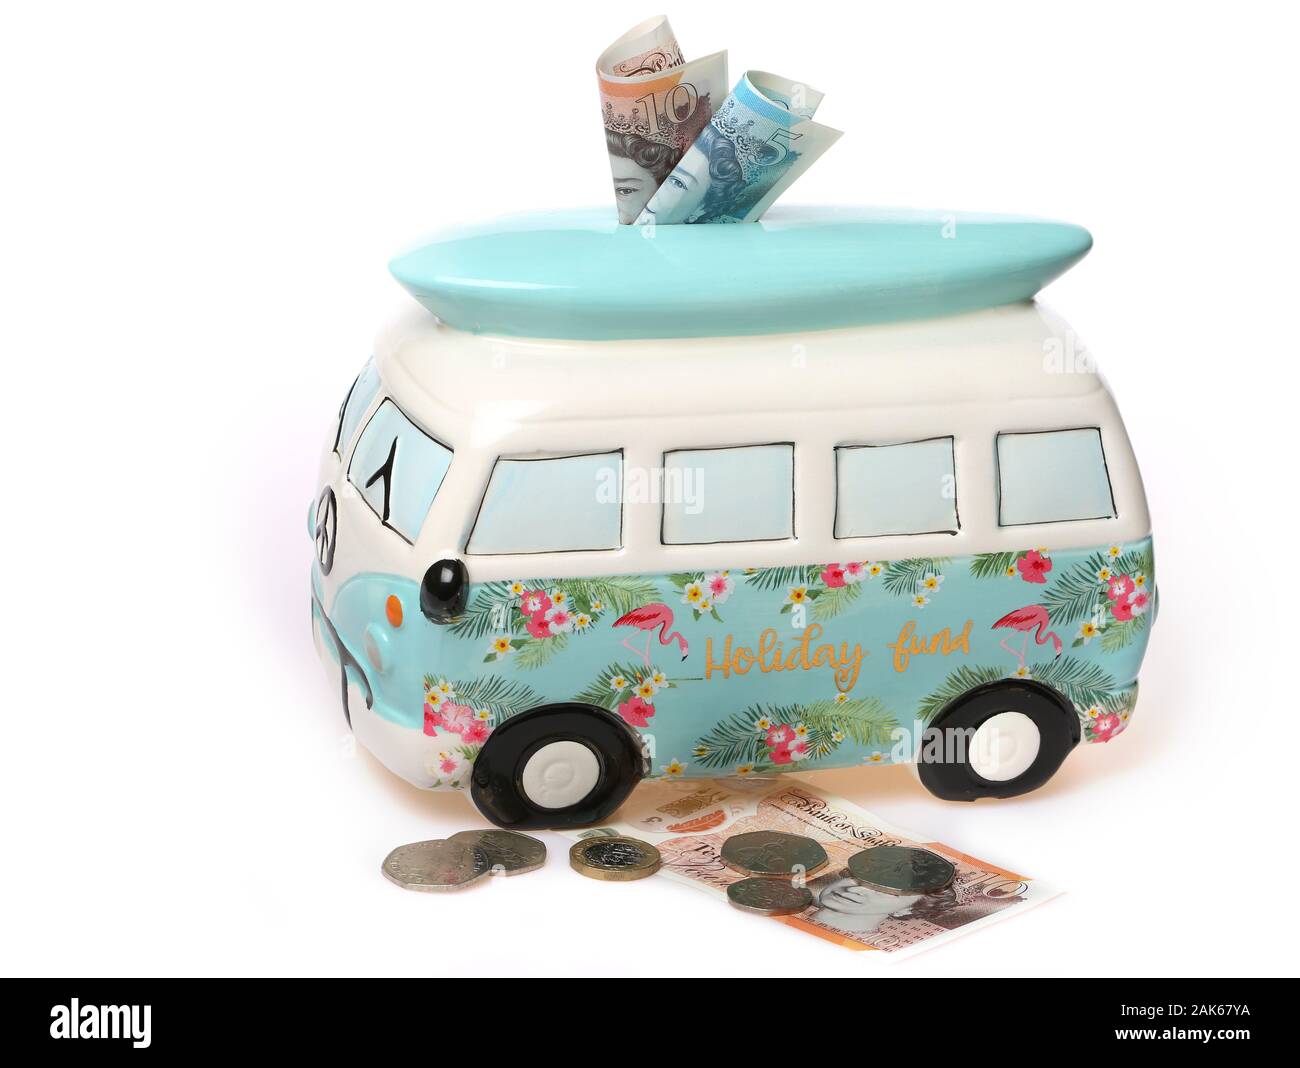 Campervan Holiday Fund money box, saving for a holiday concept image. Stock Photo